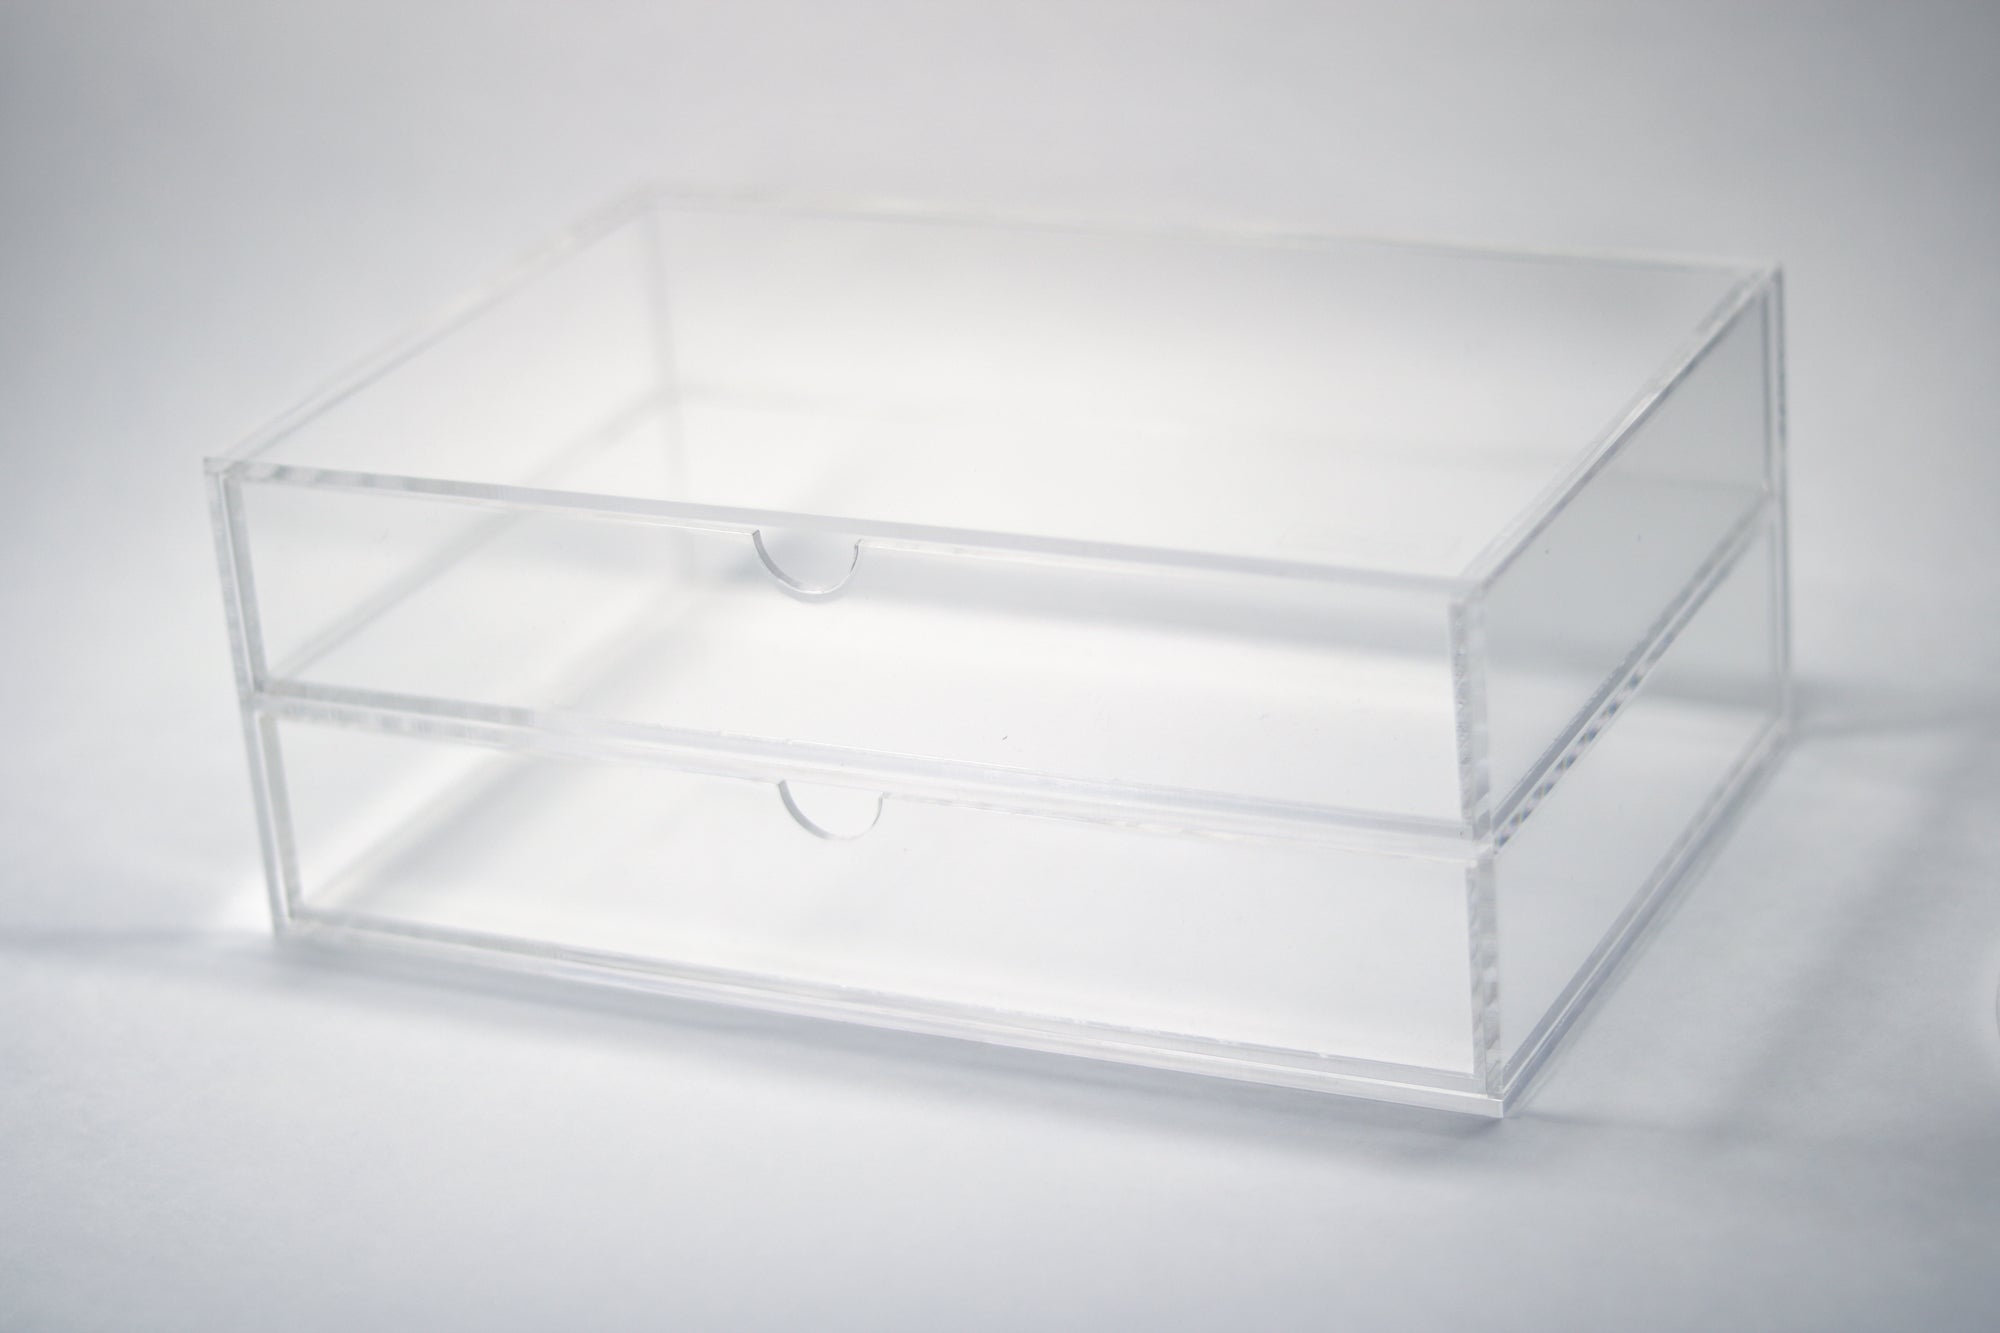 Small Clear Boxes - 1 1/2 inch depth - Perfect for Retail